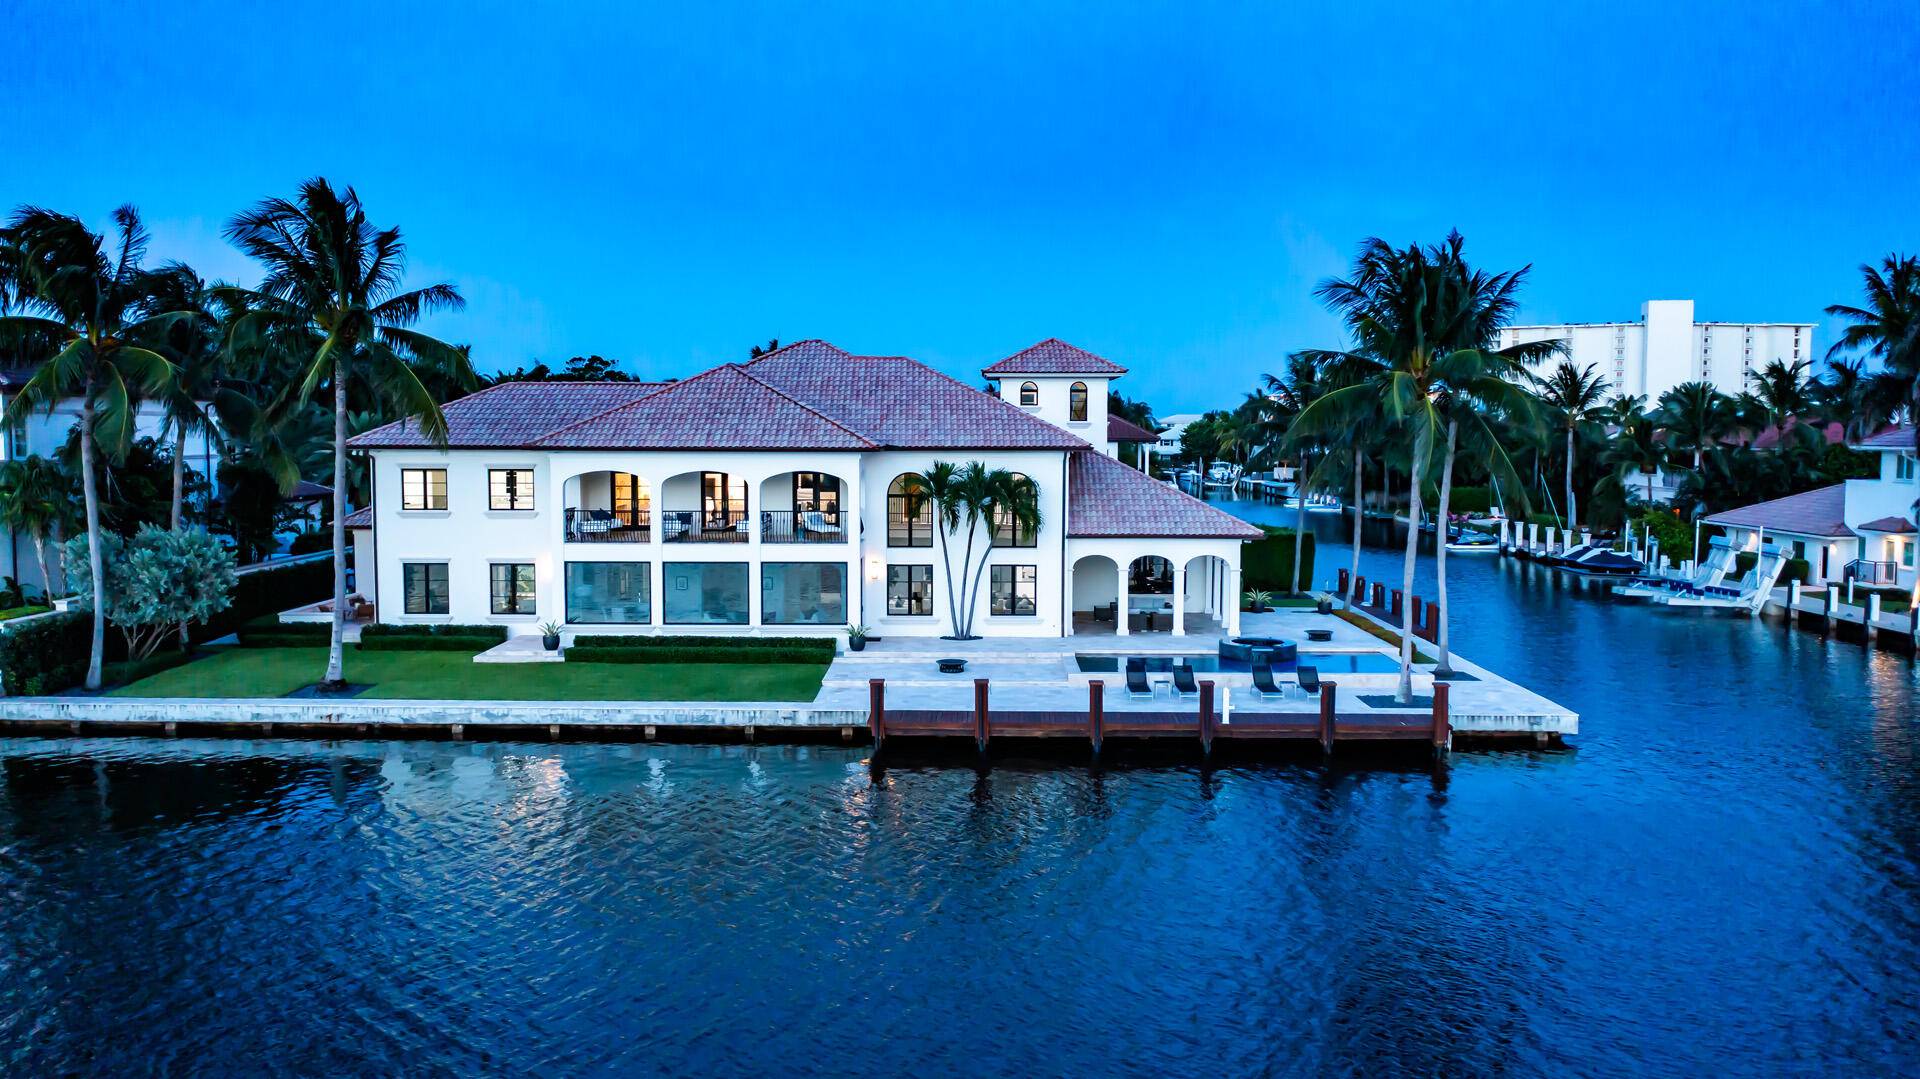 Magnificent Delray Beach estate, an architectural masterpiece recently completely reimagined and renovated with every amenity, is sited on an incredible point lot with 266 feet of waterfront and dockage on ...